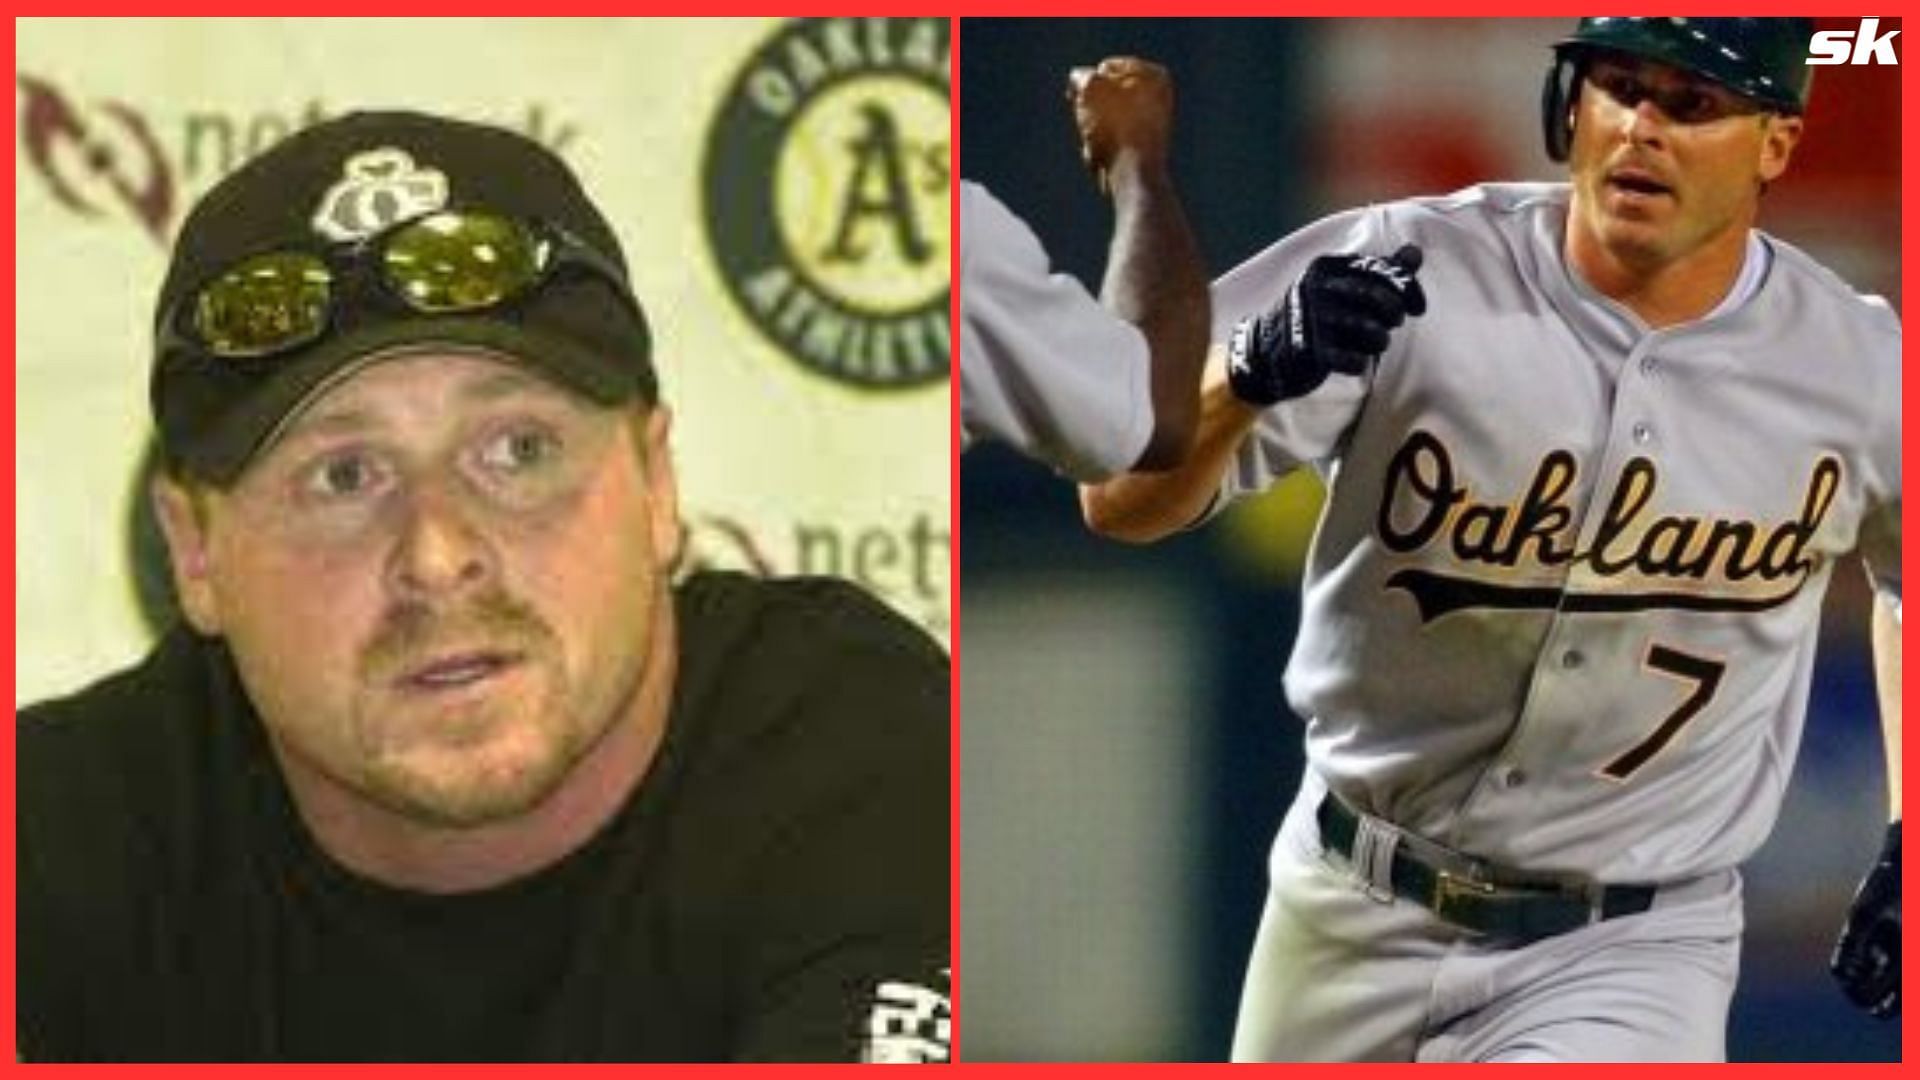 Jeremy Giambi, former Oakland Athletics player, has died